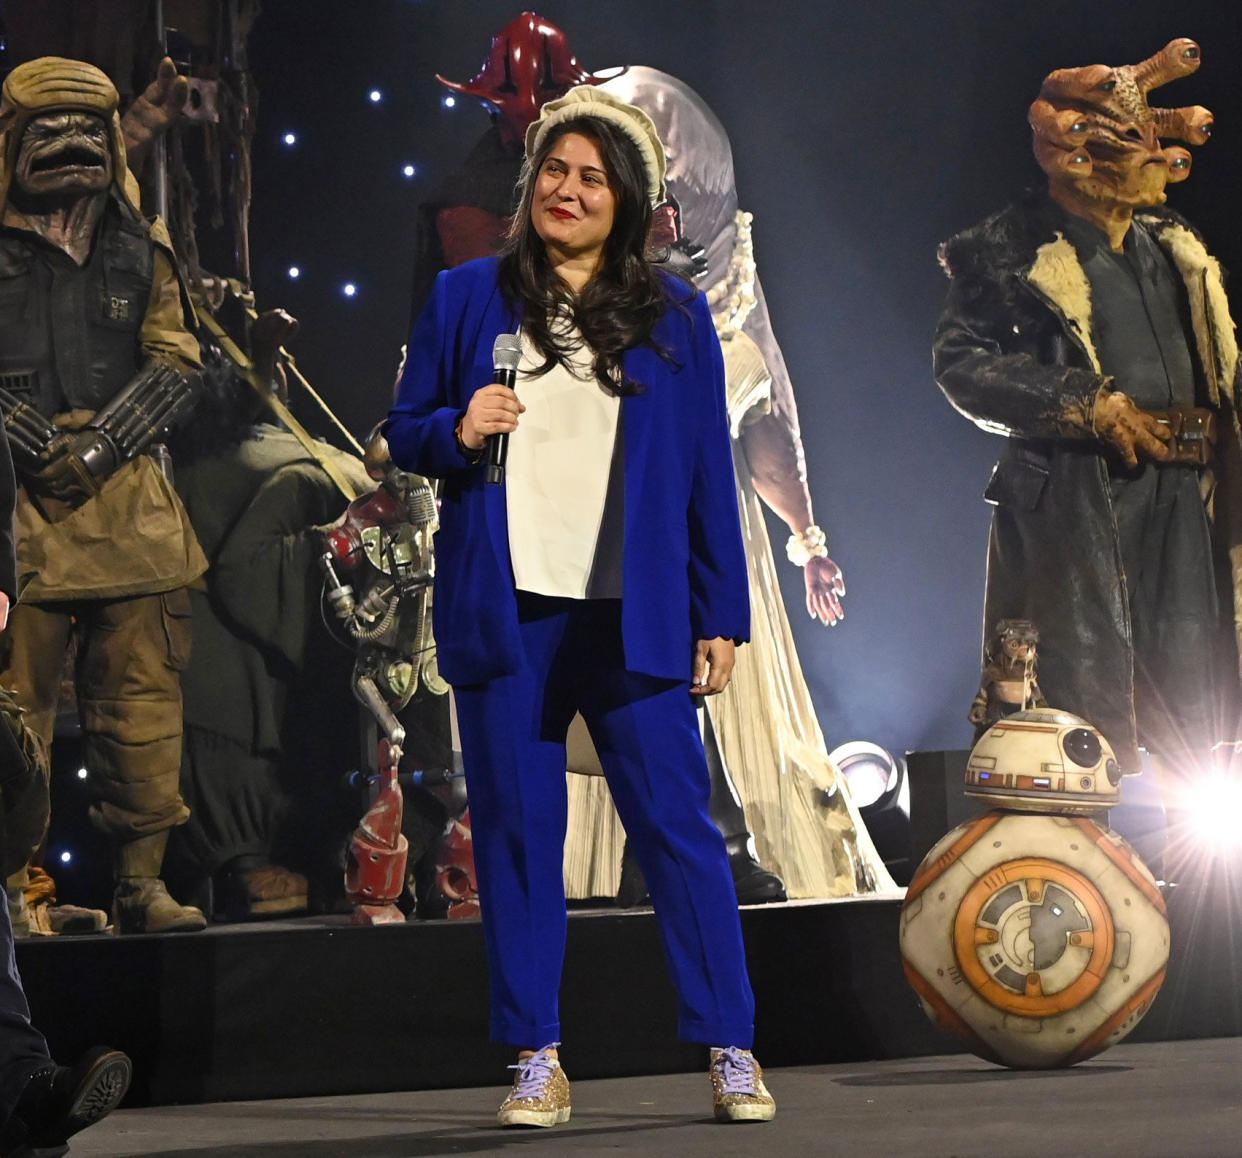 Sharmeen Obaid-Chinoy during the studio panel at Star Wars Celebration 2023 in London on April 7, 2023. (Kate Green / Getty Images)